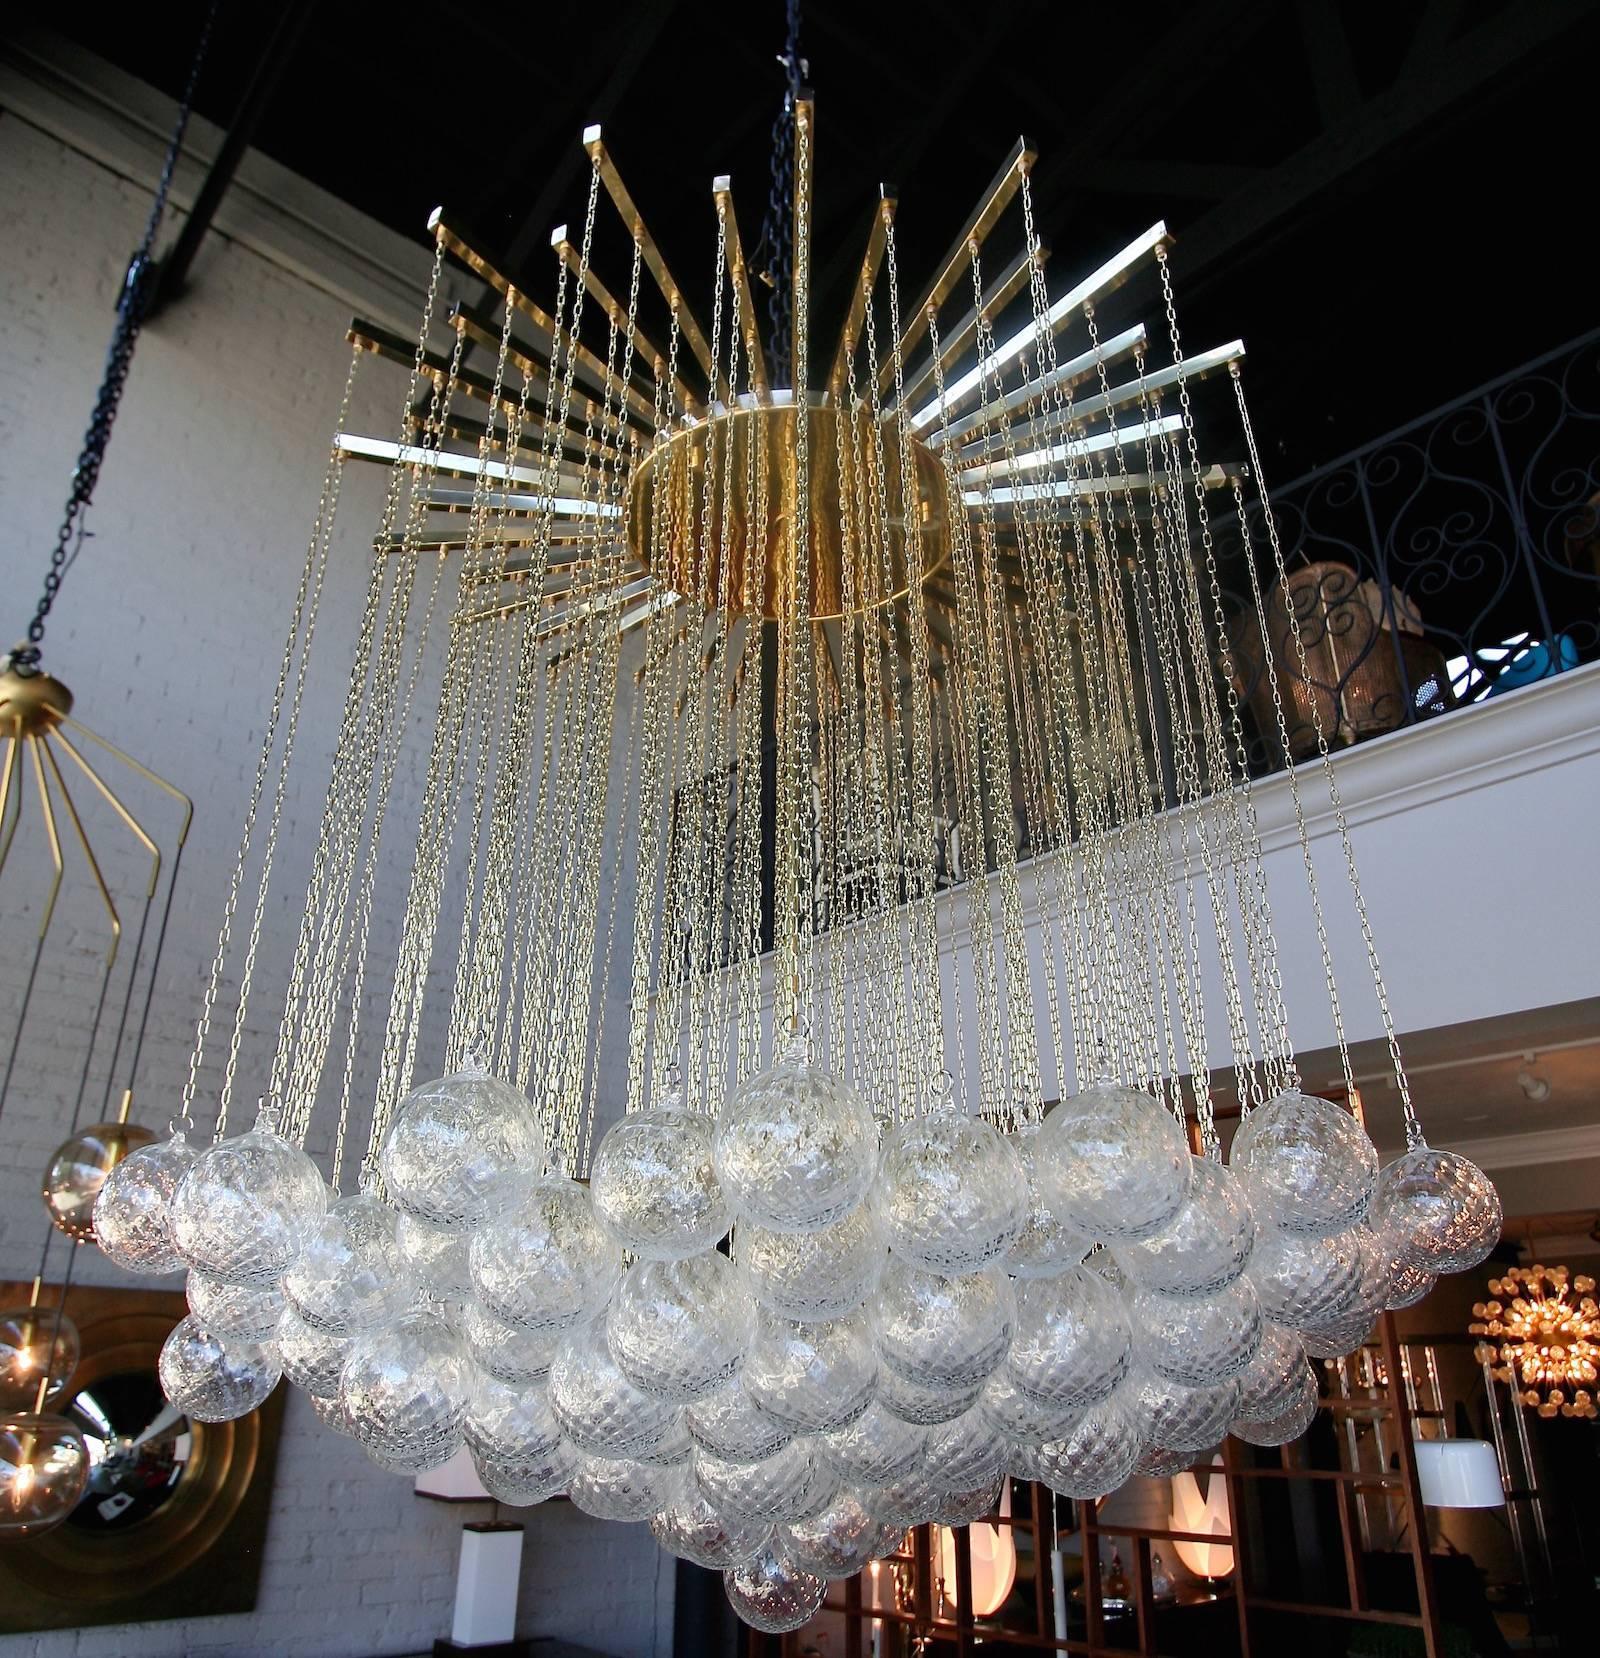 1970s Italian midcentury chandelier with 137 clear glass balls hanging from fine brass chains from a starburst frame.